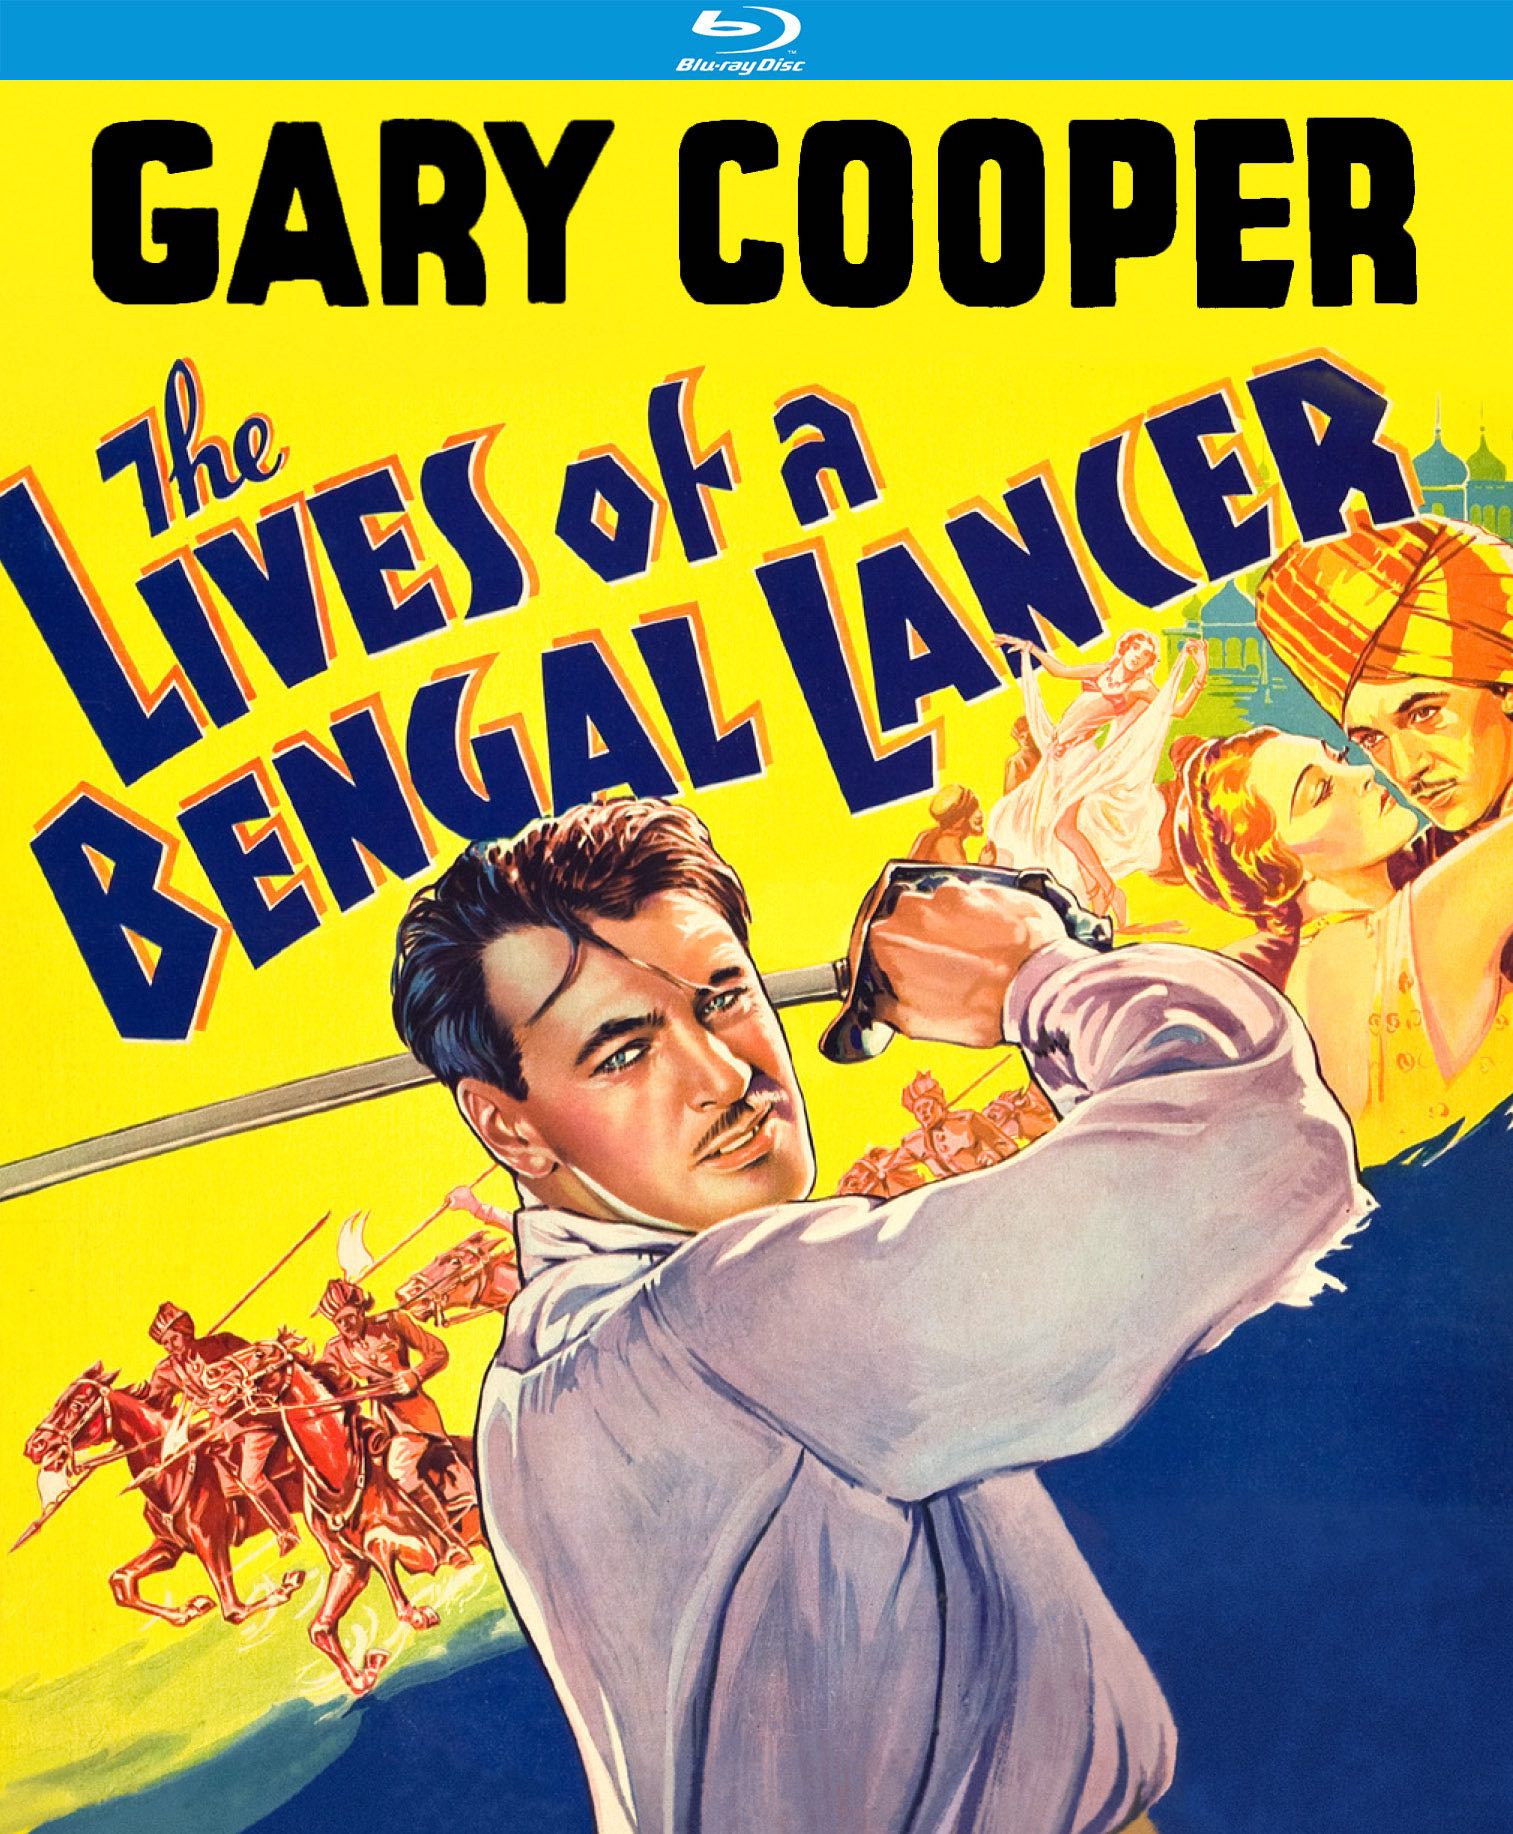 Lives of a Bengal Lancer [Blu-ray] cover art